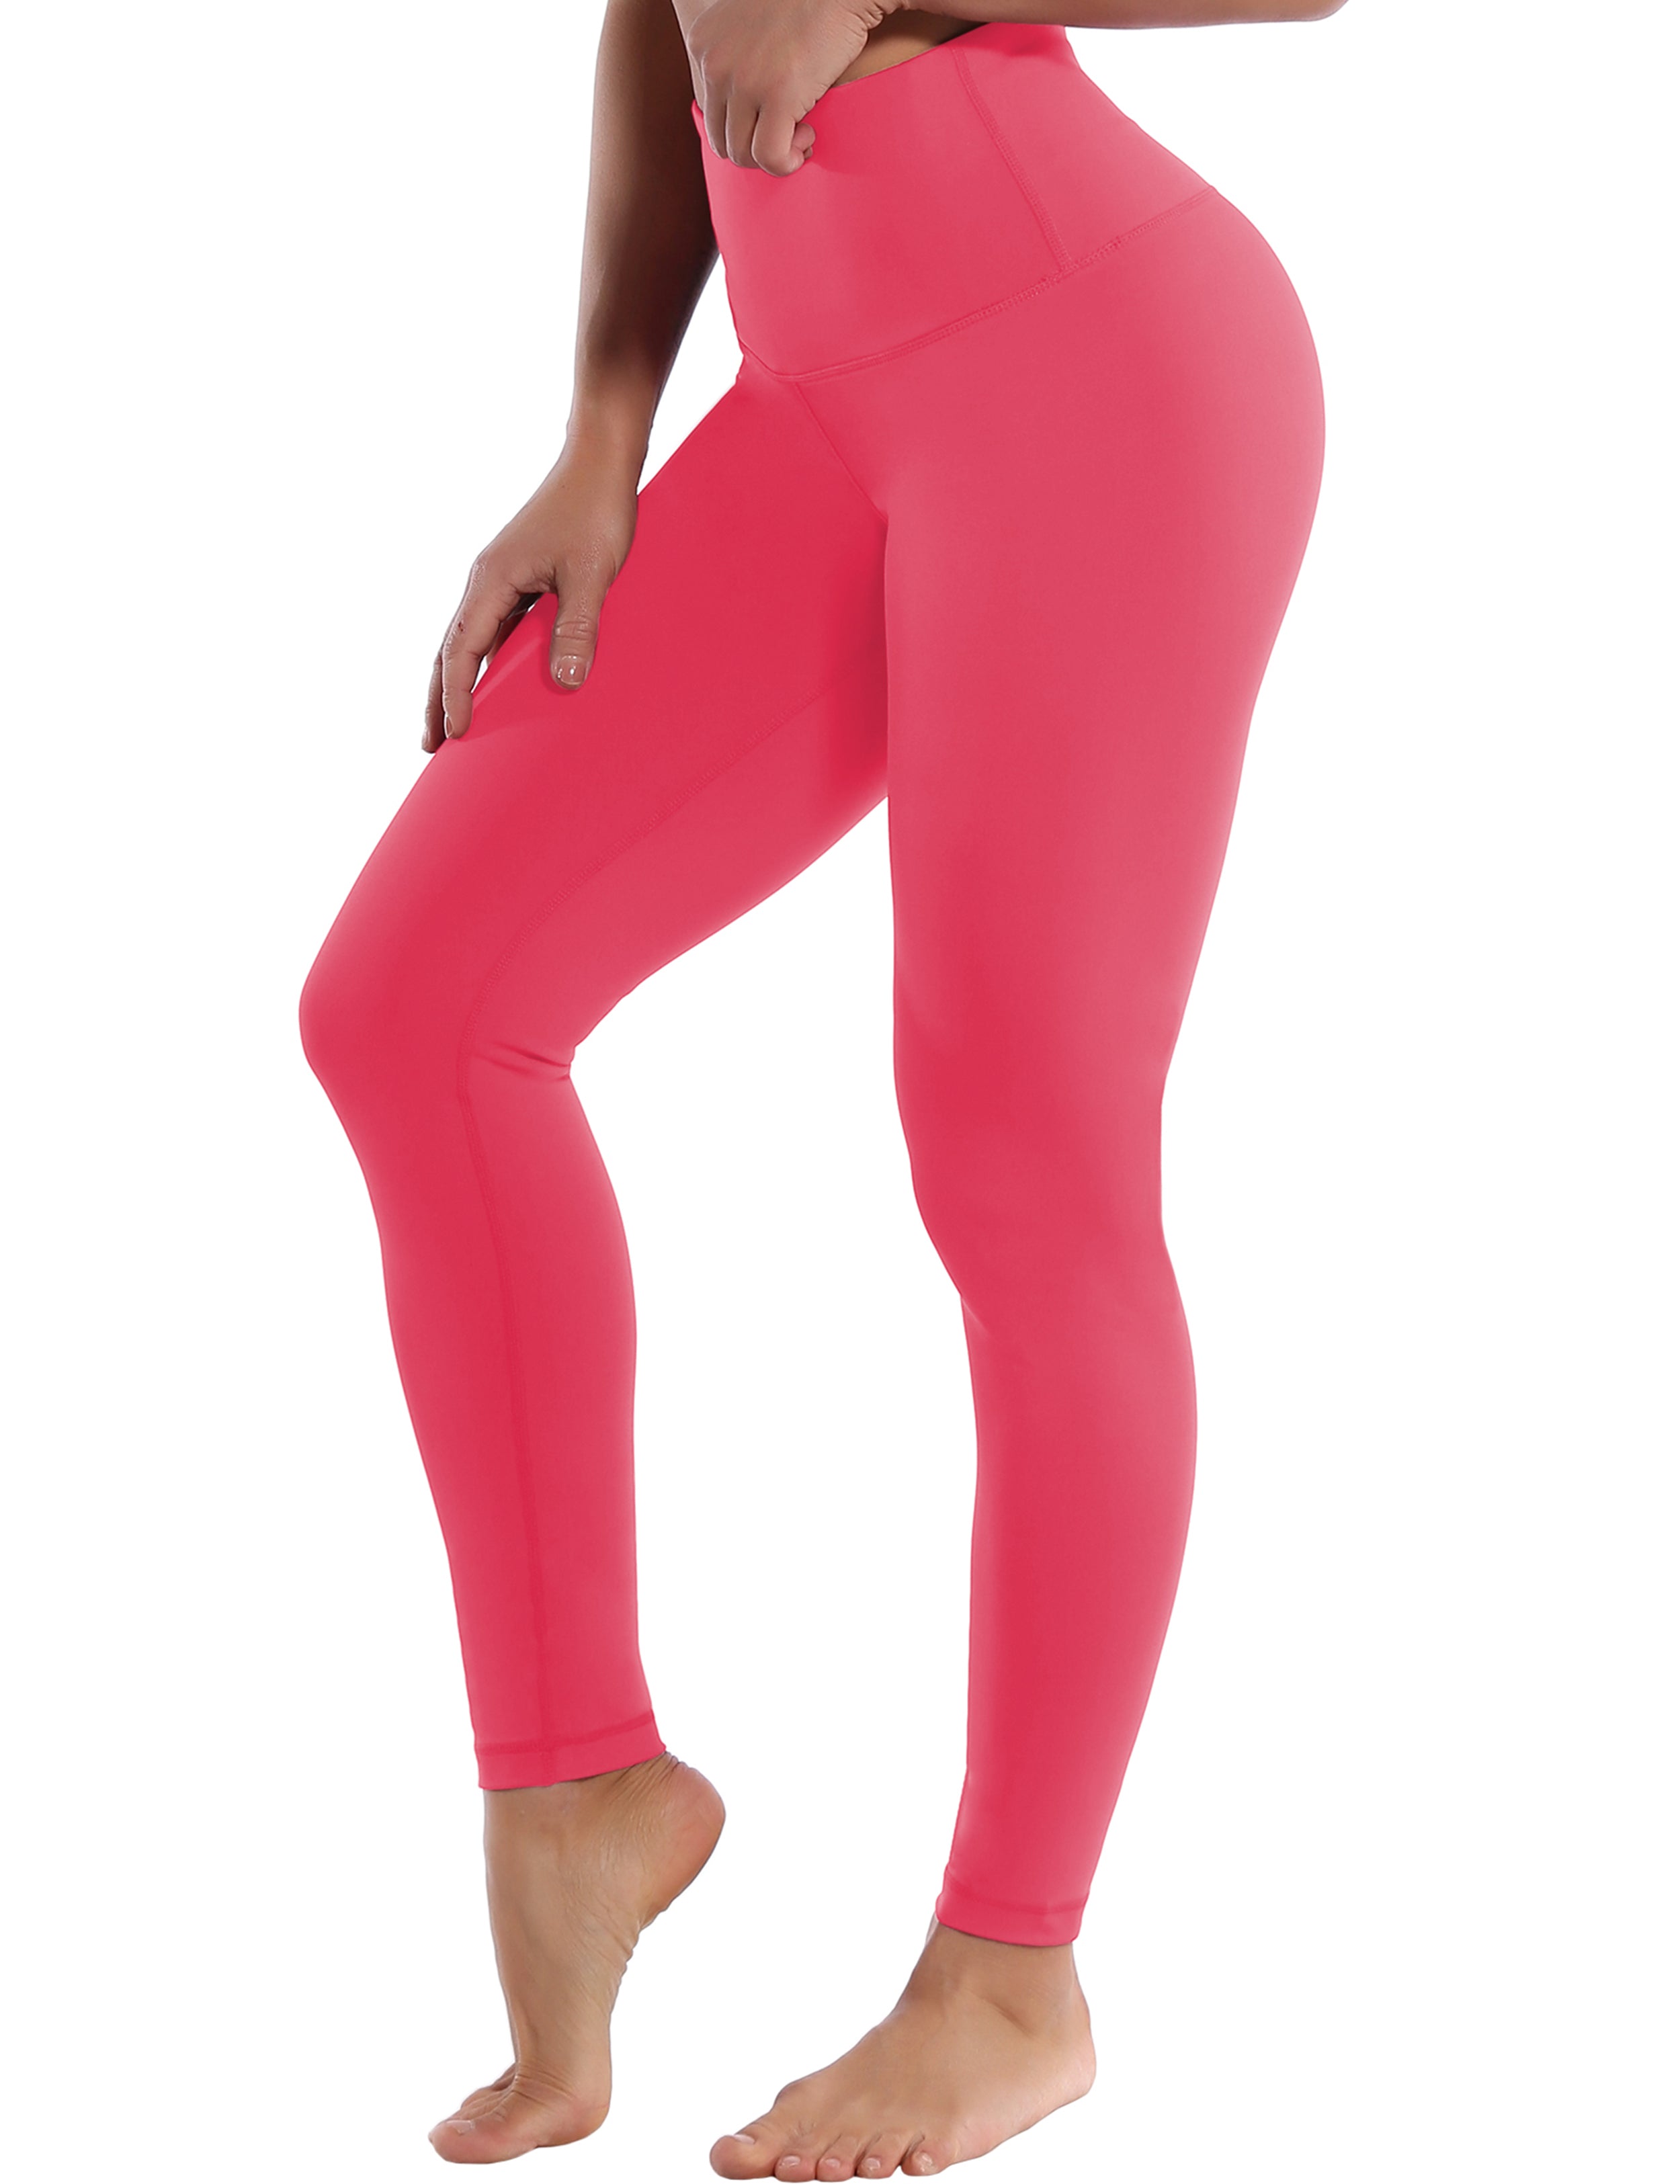 High Waist Biking Pants rosecoral 75%Nylon/25%Spandex Fabric doesn't attract lint easily 4-way stretch No see-through Moisture-wicking Tummy control Inner pocket Four lengths